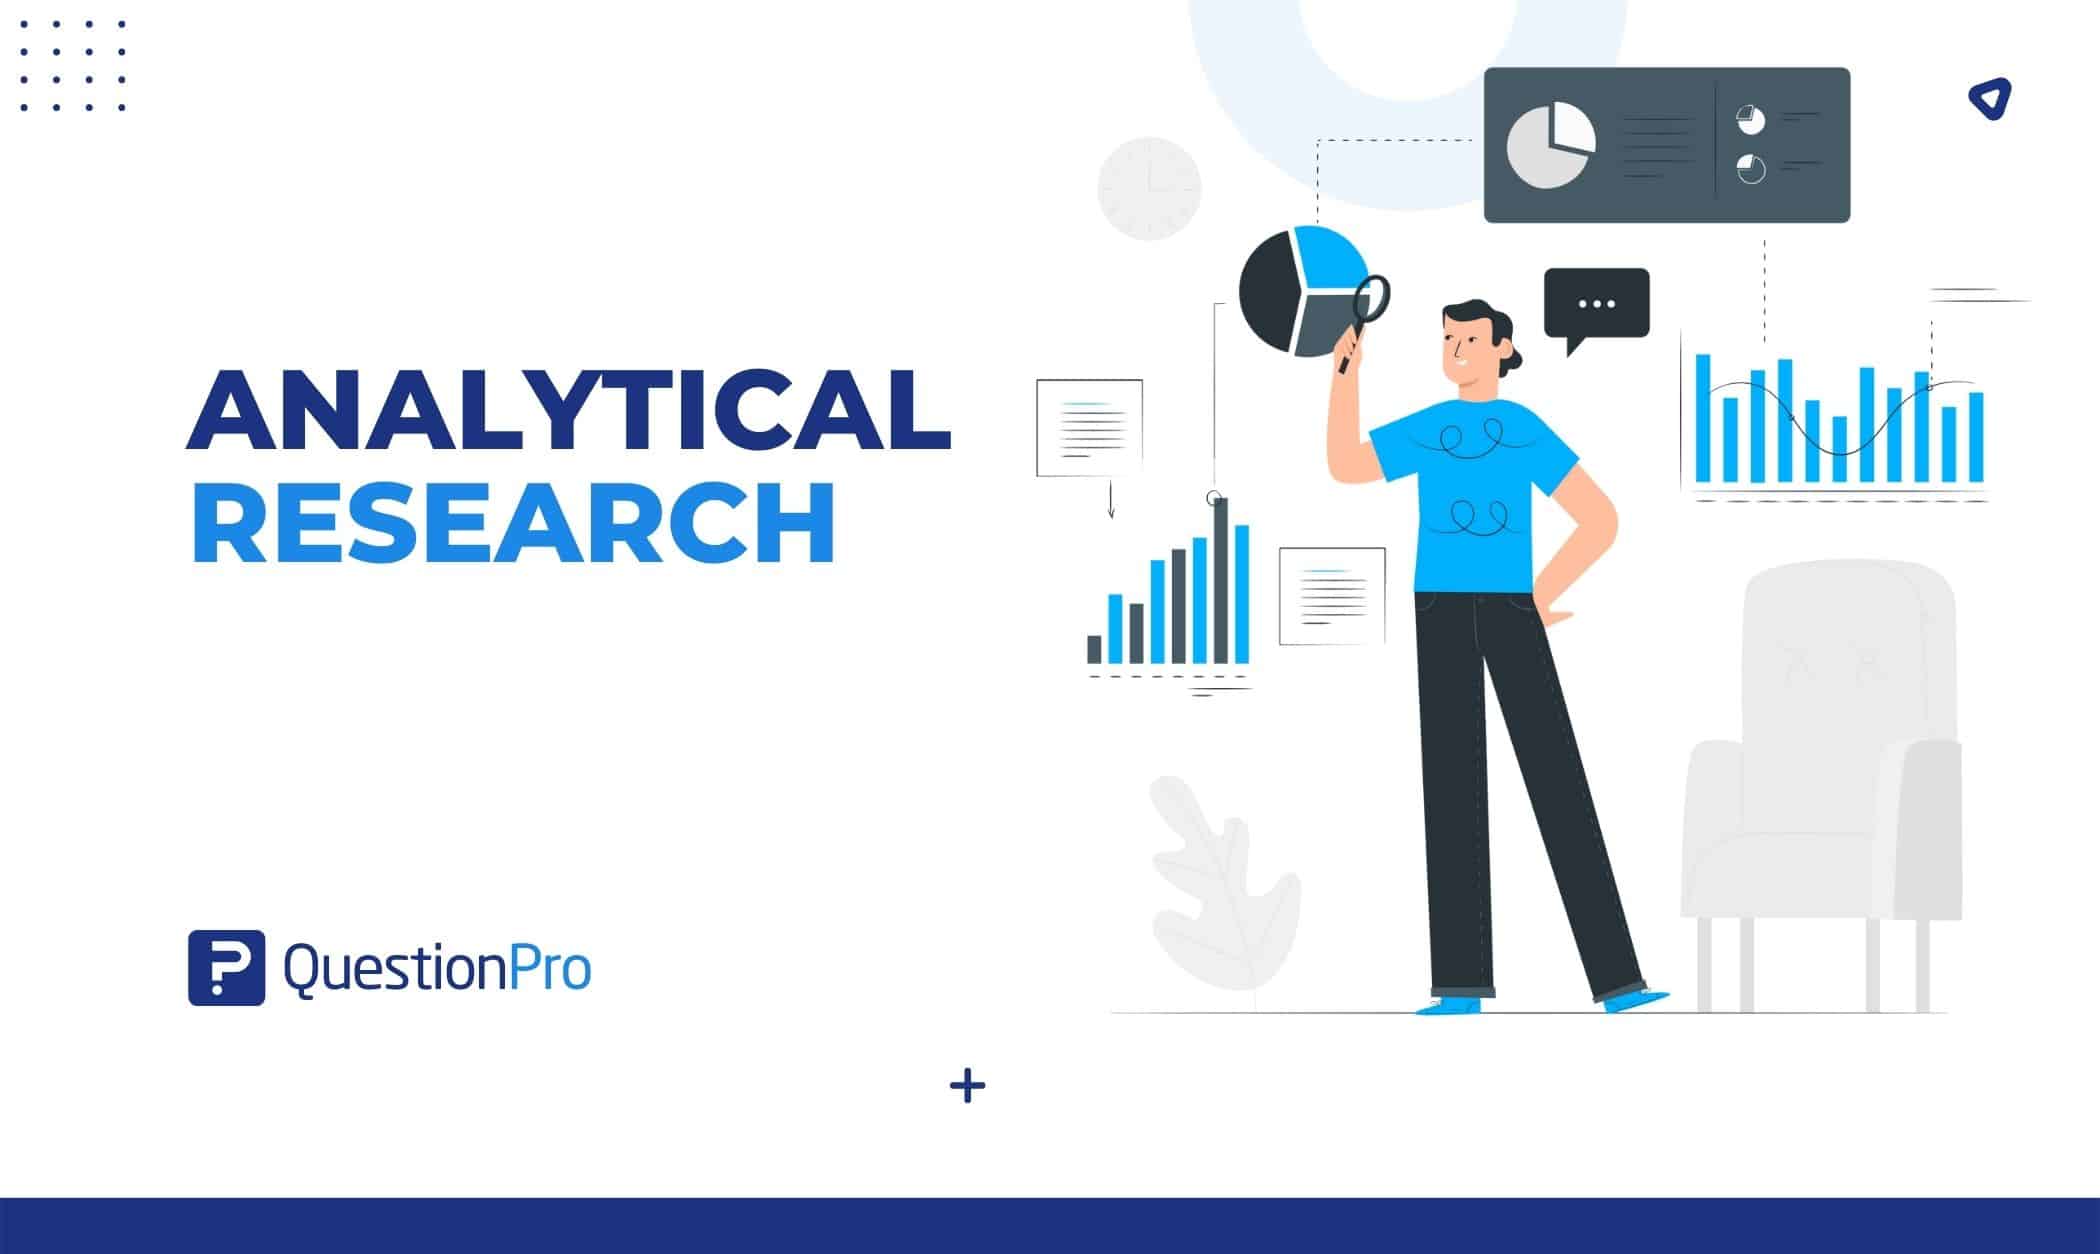 analytical research design meaning